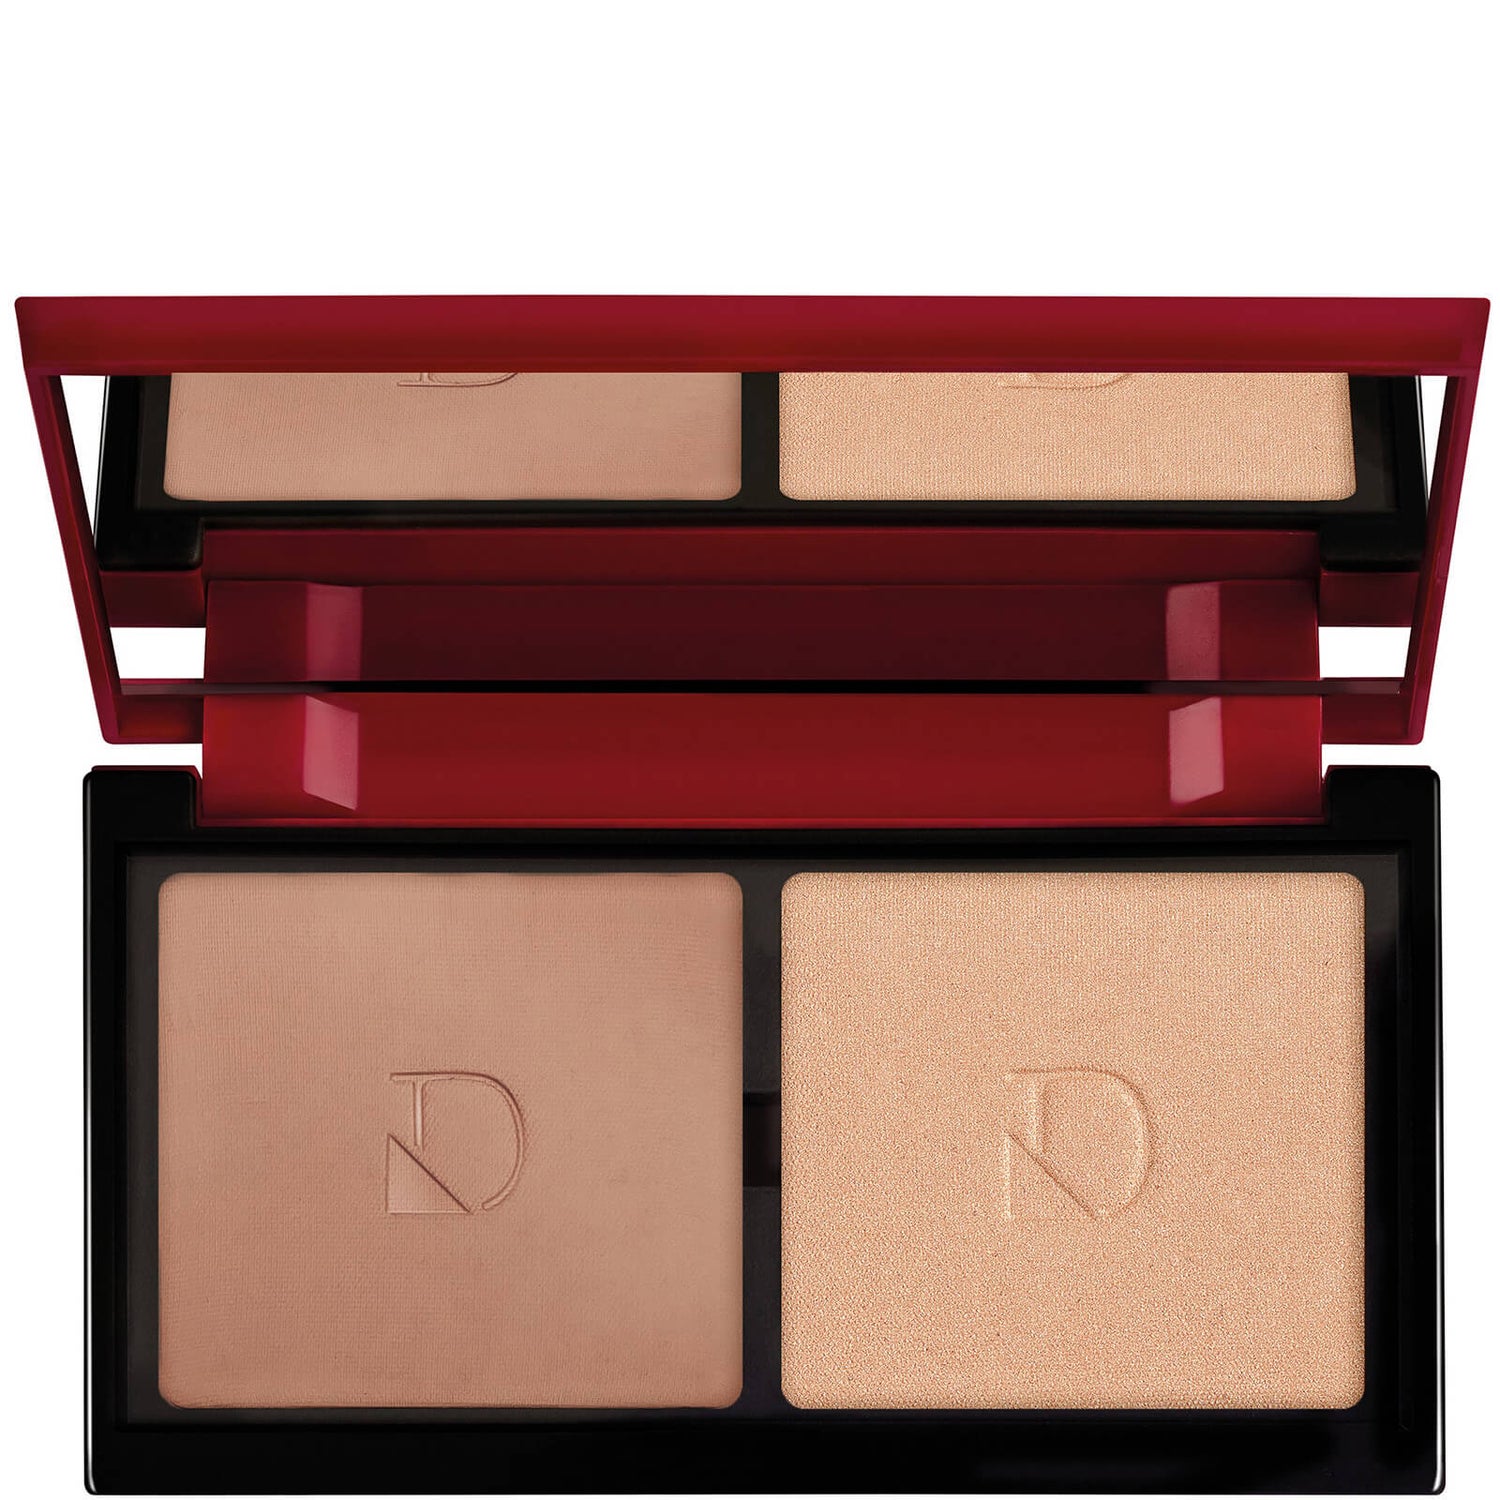 Diego Dalla Palma Highlighter and Bronzer Palette 35g